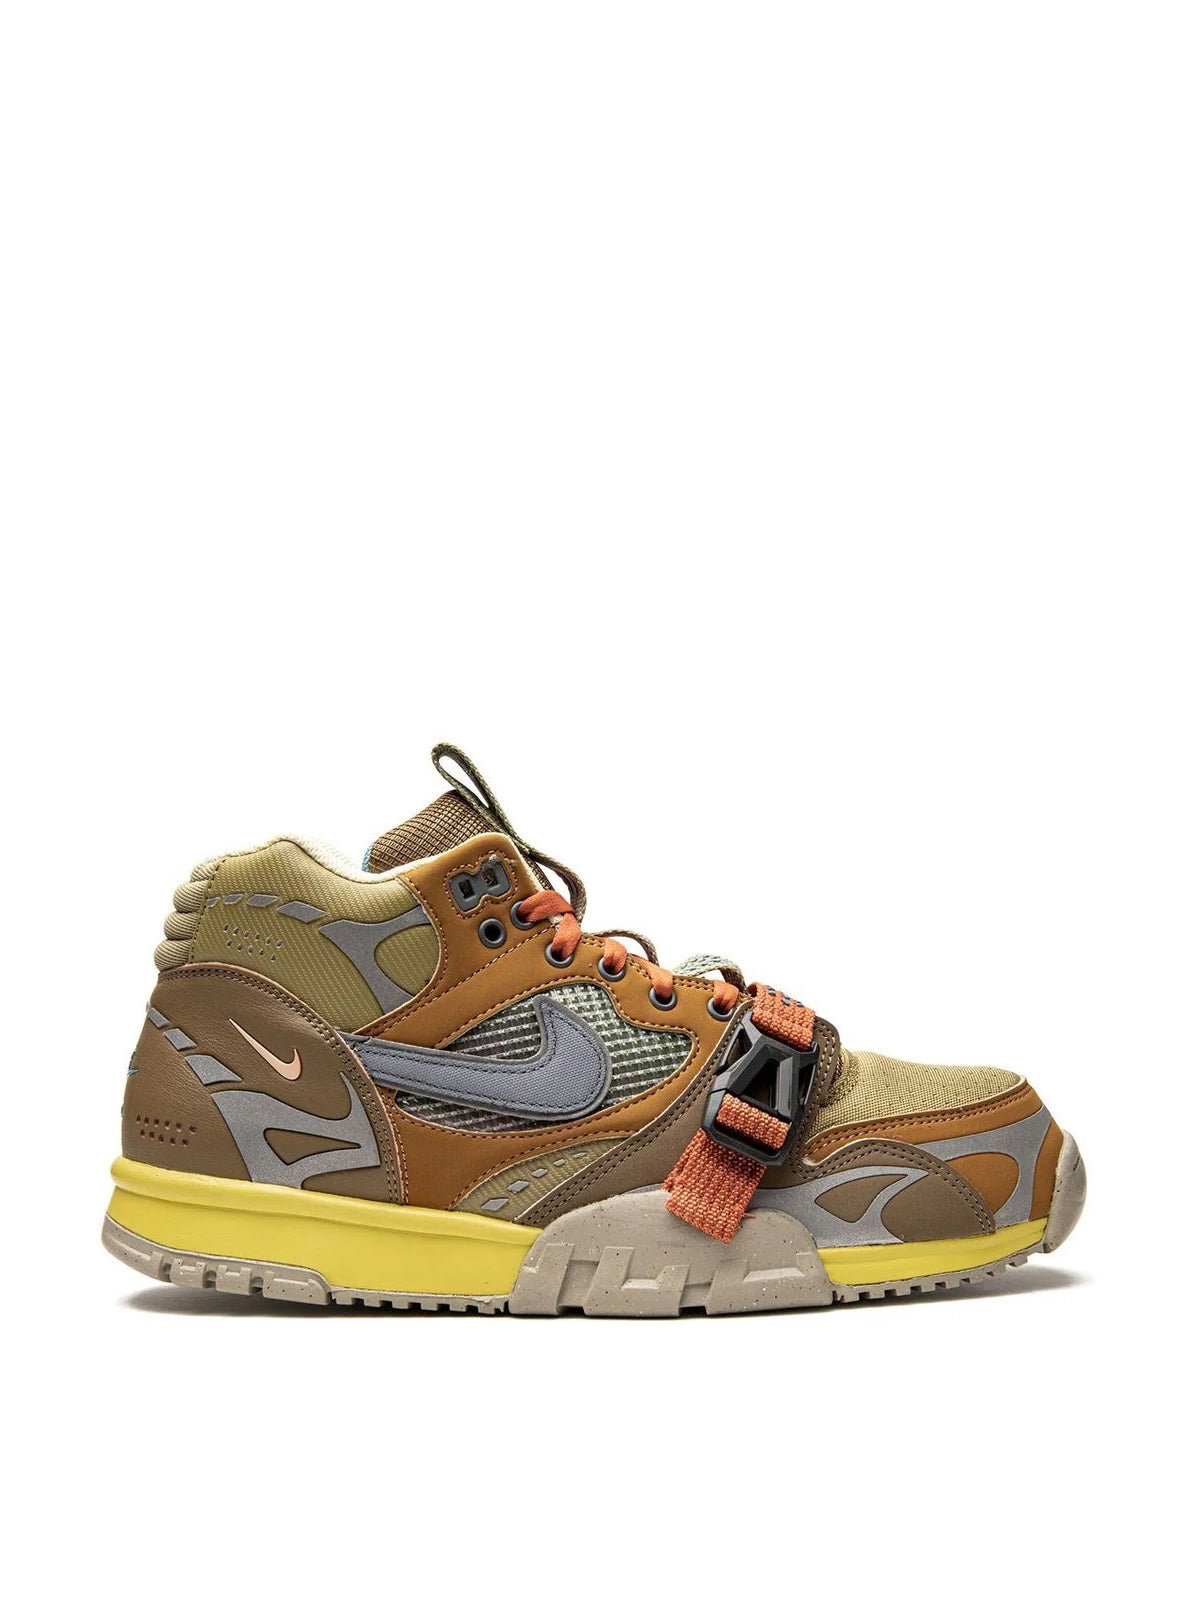 Nike-OUTLET-SALE-Air Trainer 1 SP Coriander Sneakers-ARCHIVIST